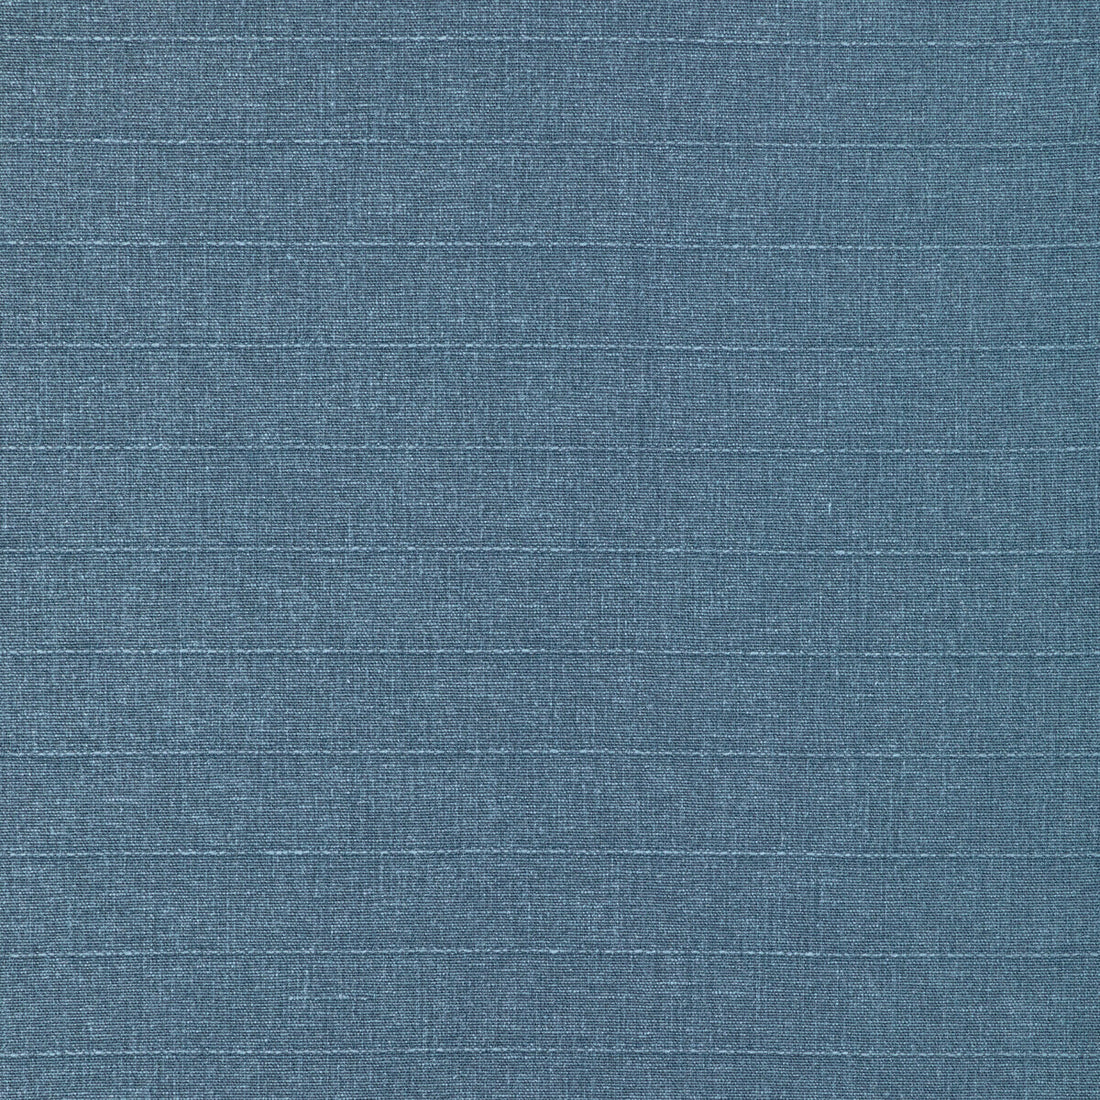 Pomo Canyon fabric in chambray color - pattern 36381.5.0 - by Kravet Basics in the Jeffrey Alan Marks Seascapes collection